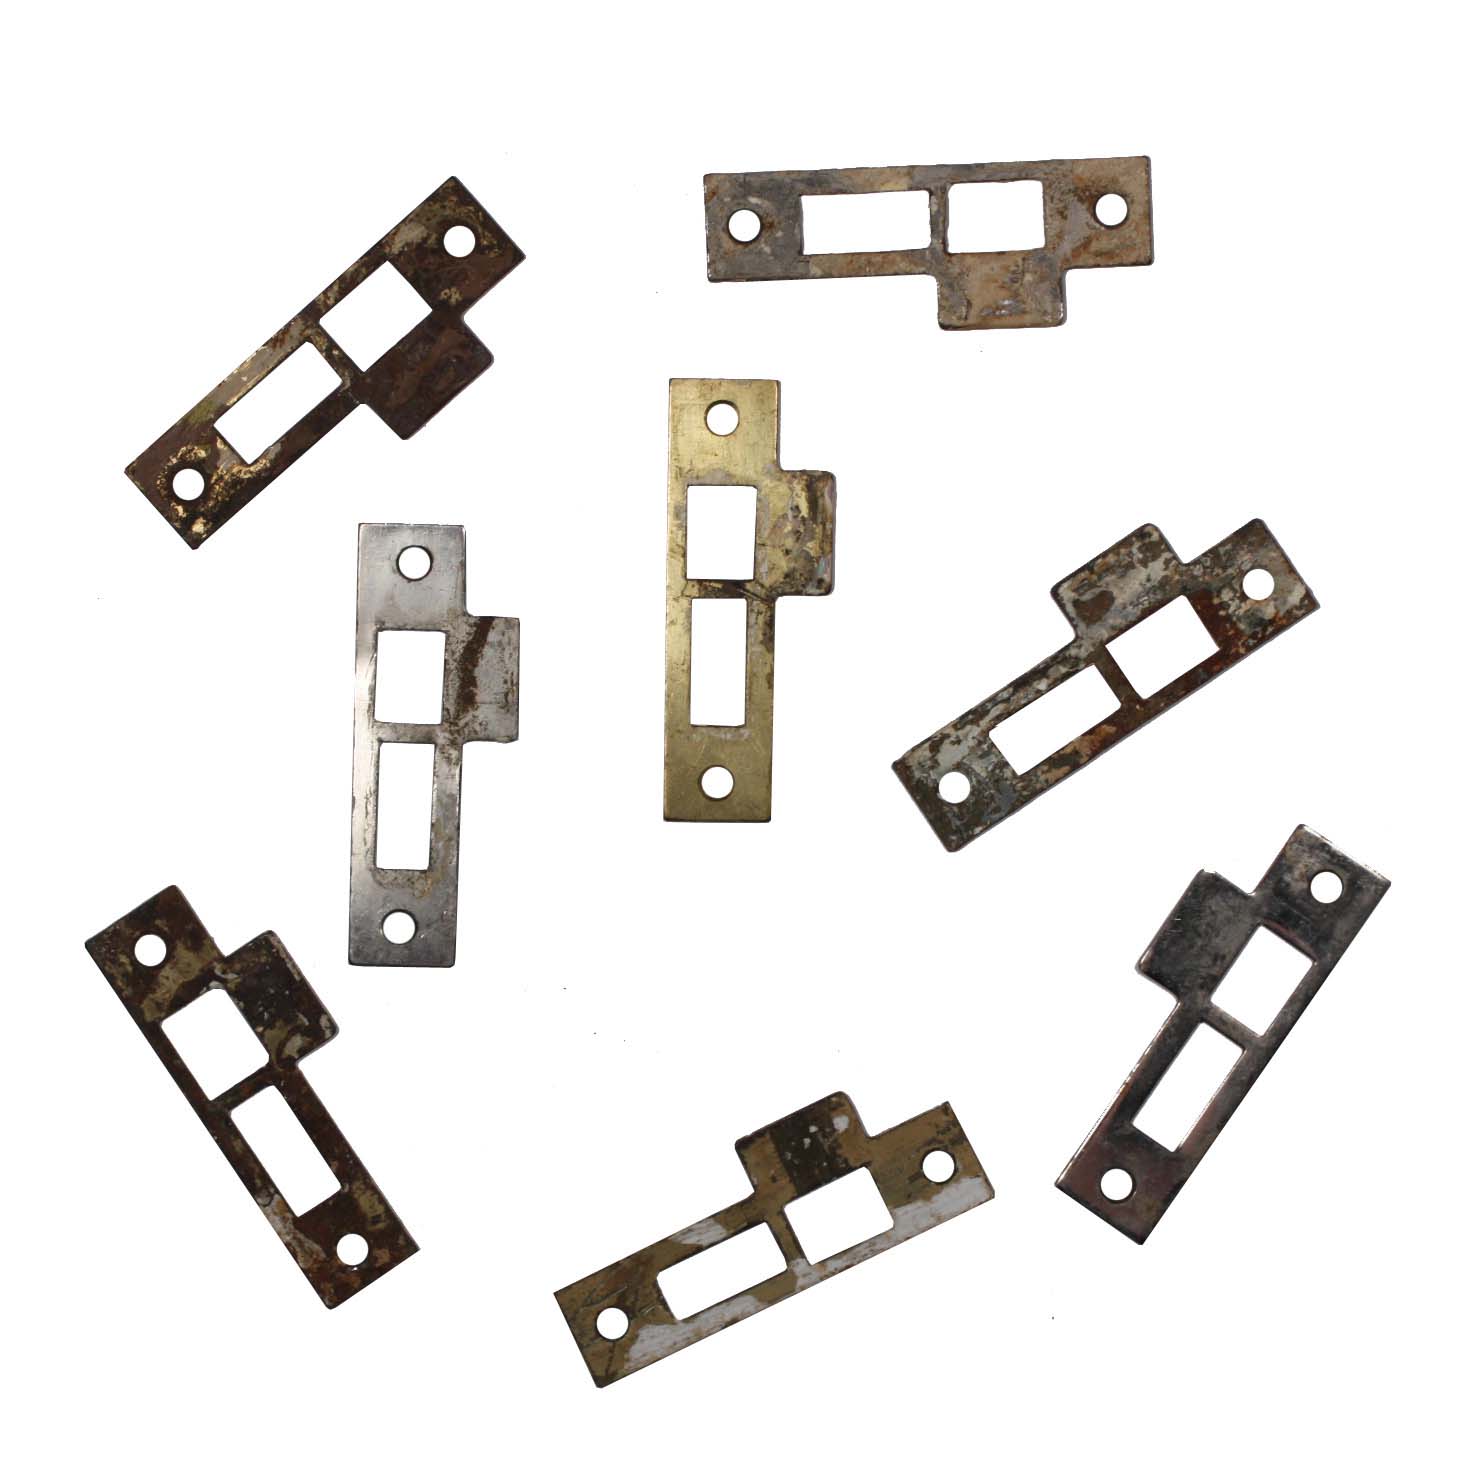 SOLD Antique Strike Plates for Mortise Locks, 5/32” Spacing-40641